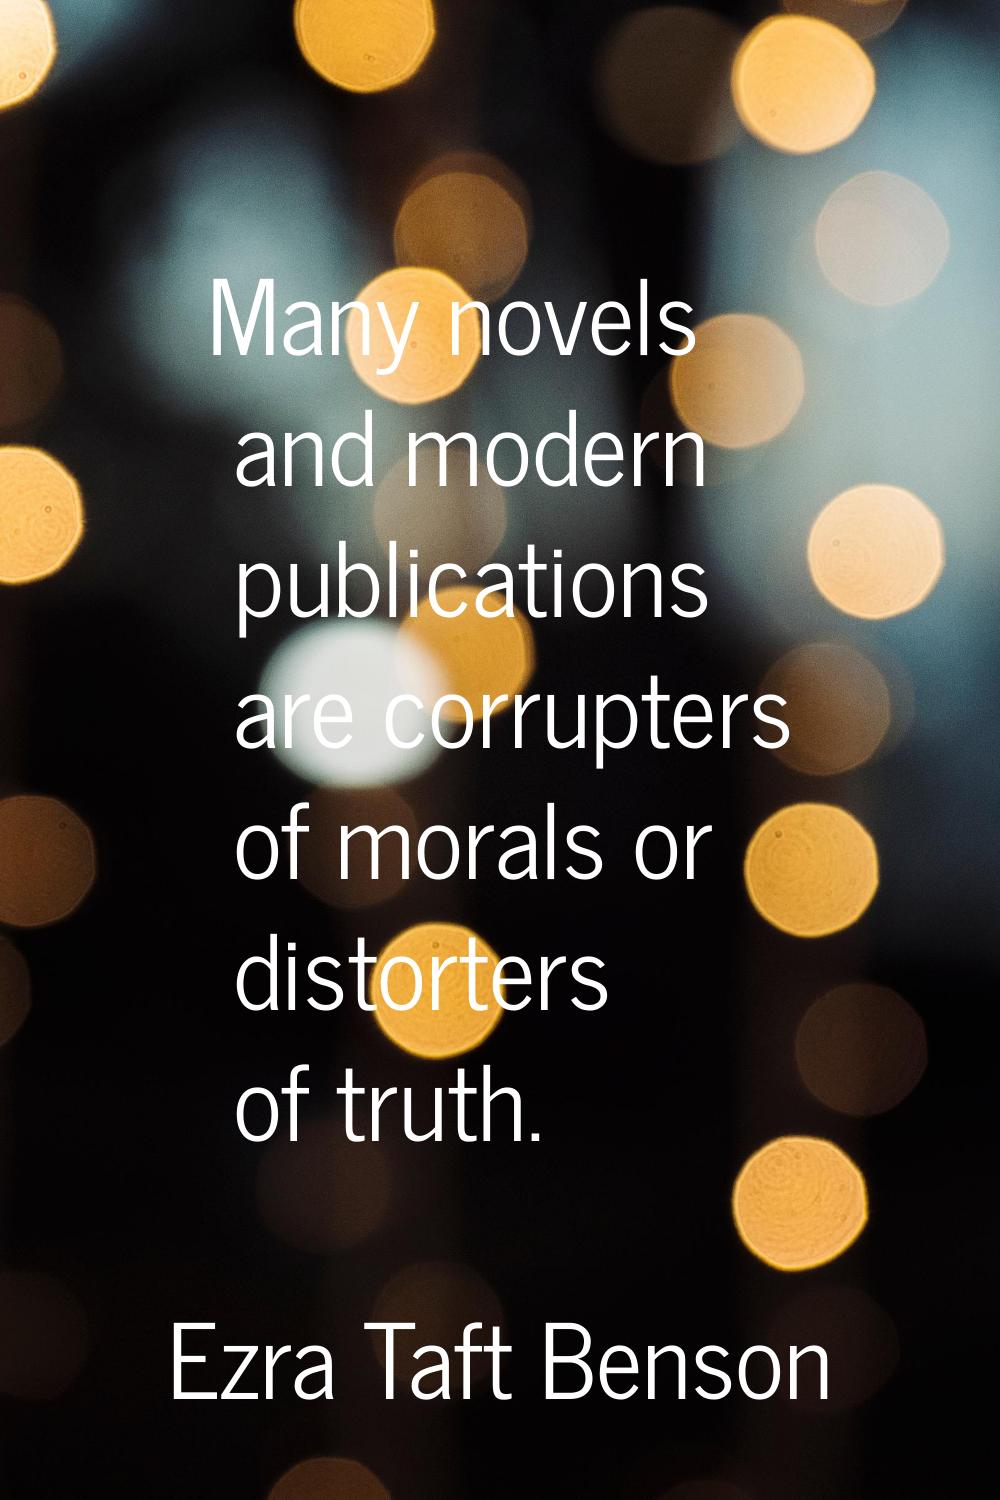 Many novels and modern publications are corrupters of morals or distorters of truth.